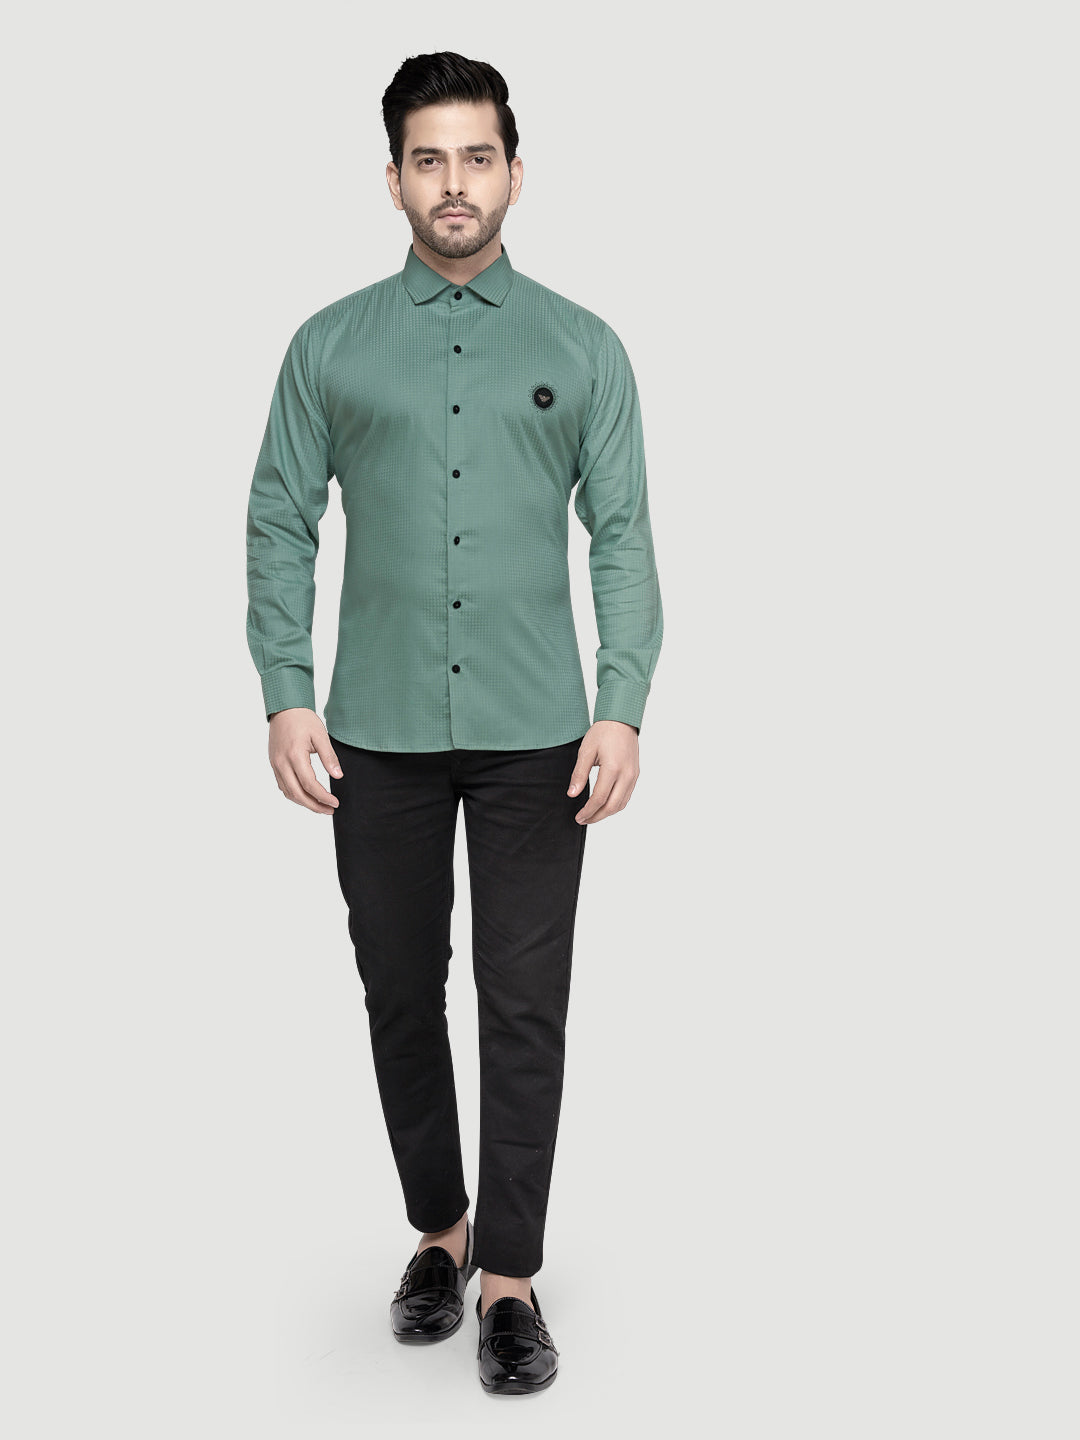 Black and white shirts Men's Designer Shirt with textured dobby fabric & Patch Teal Green